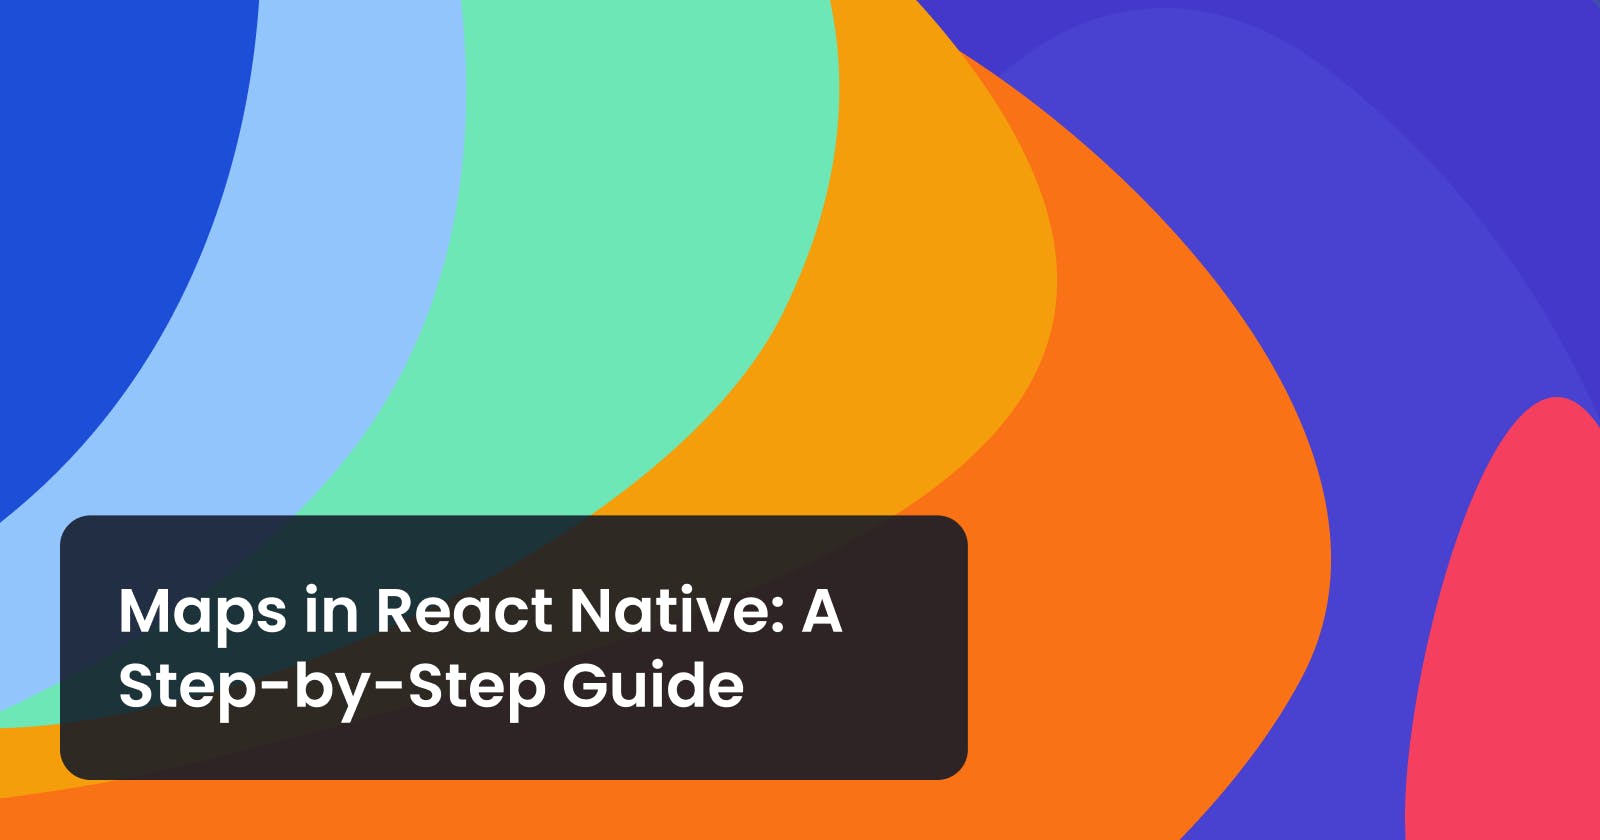 Maps in React Native: A Step-by-Step Guide